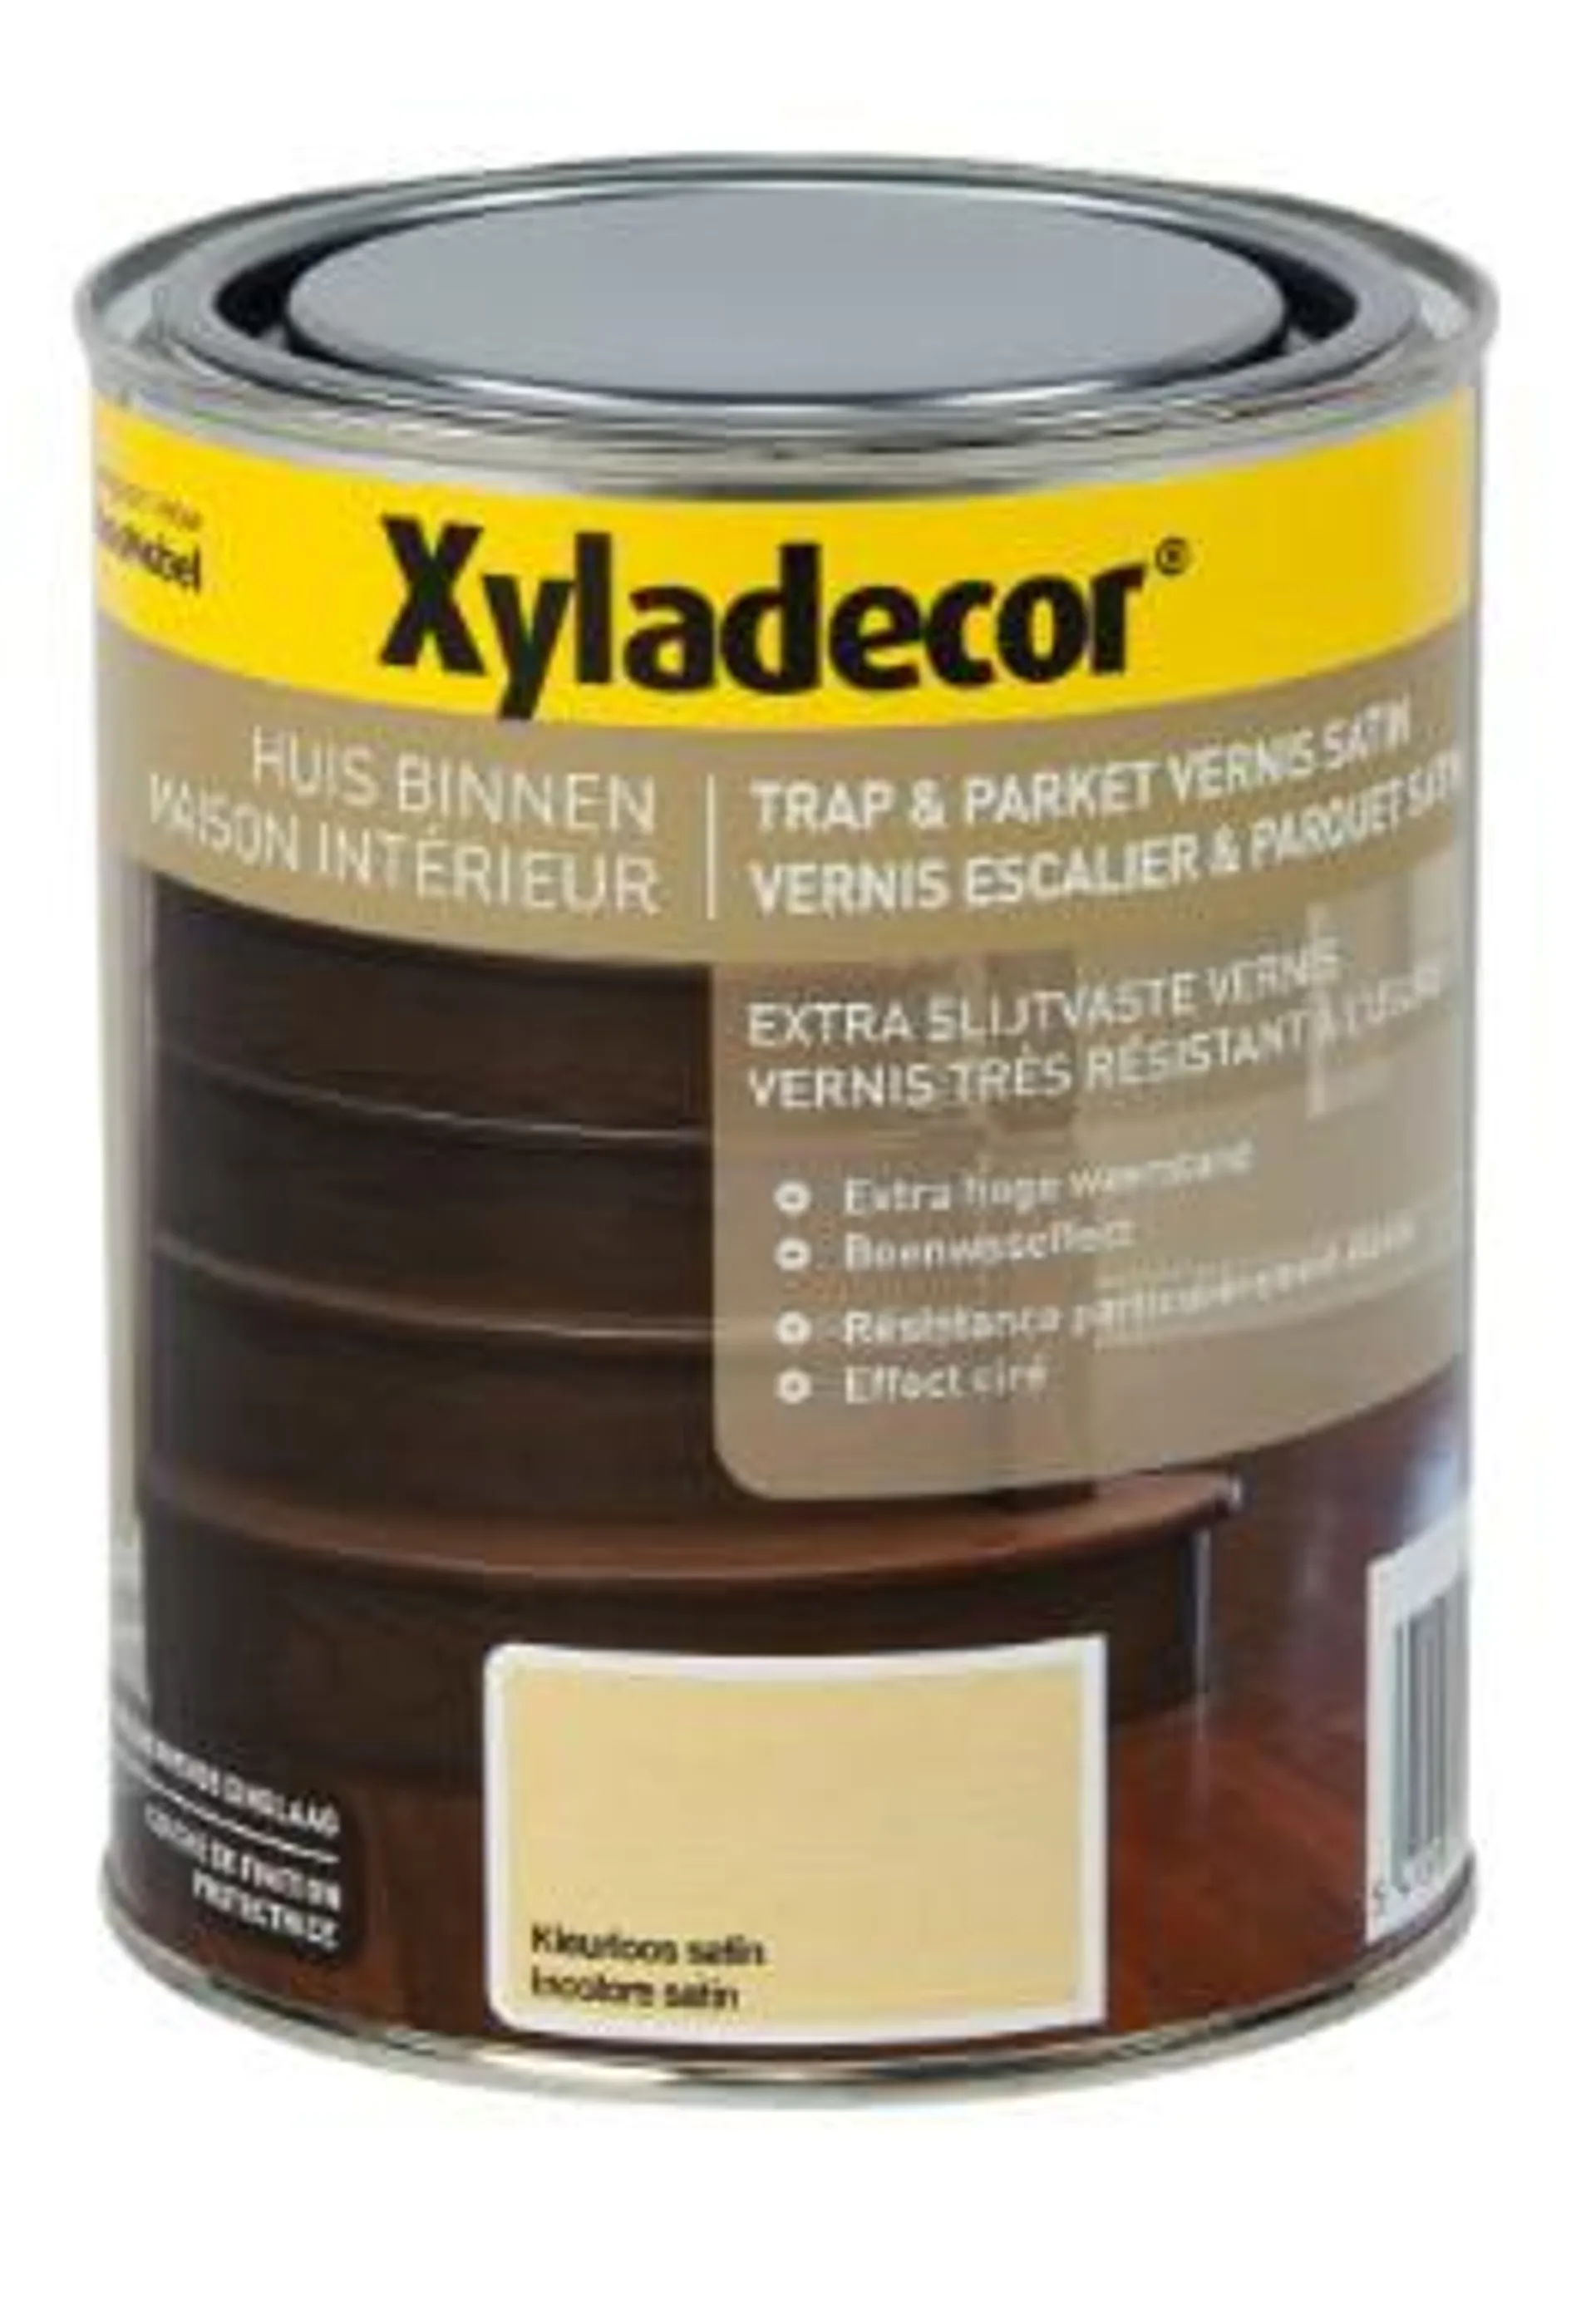 XYLADECOR PARKET VERNIS EXTRA PROTECT S 0.75L